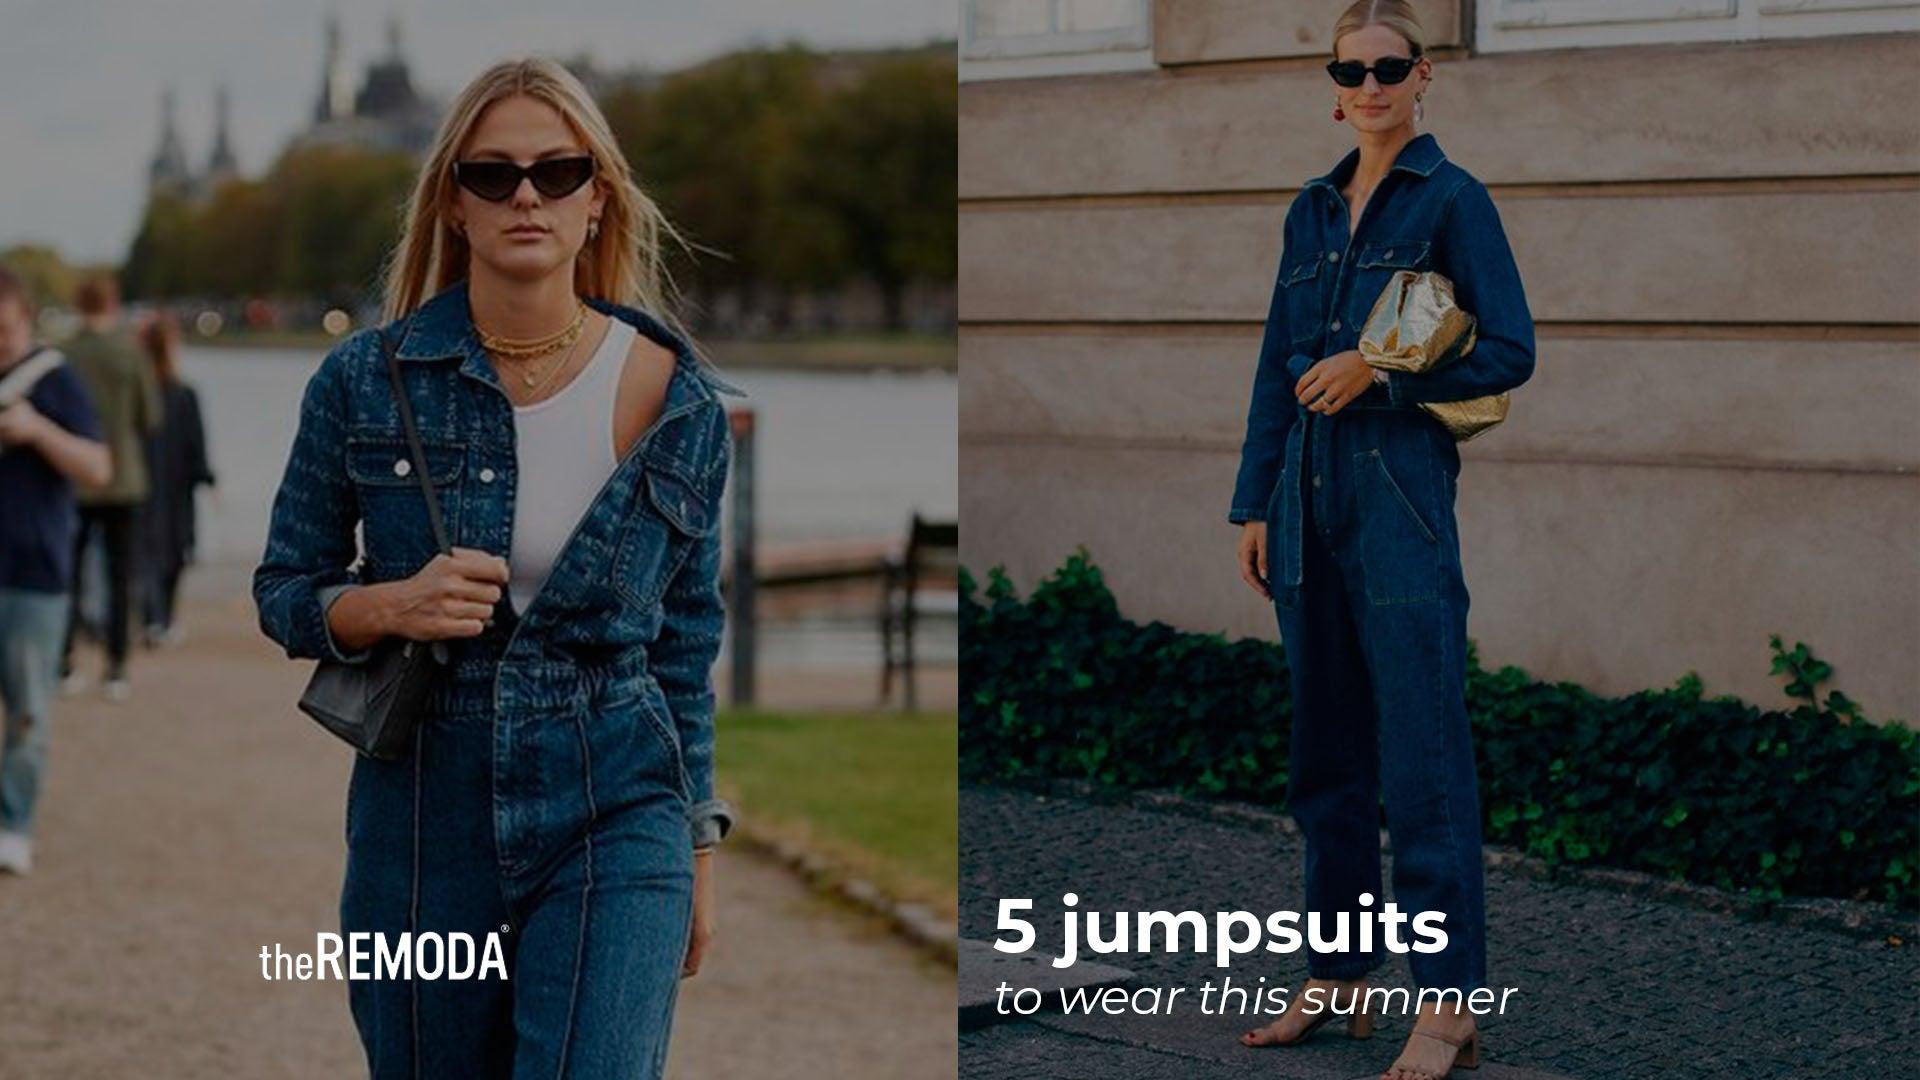 5 jumpsuits to wear this summer - theREMODA